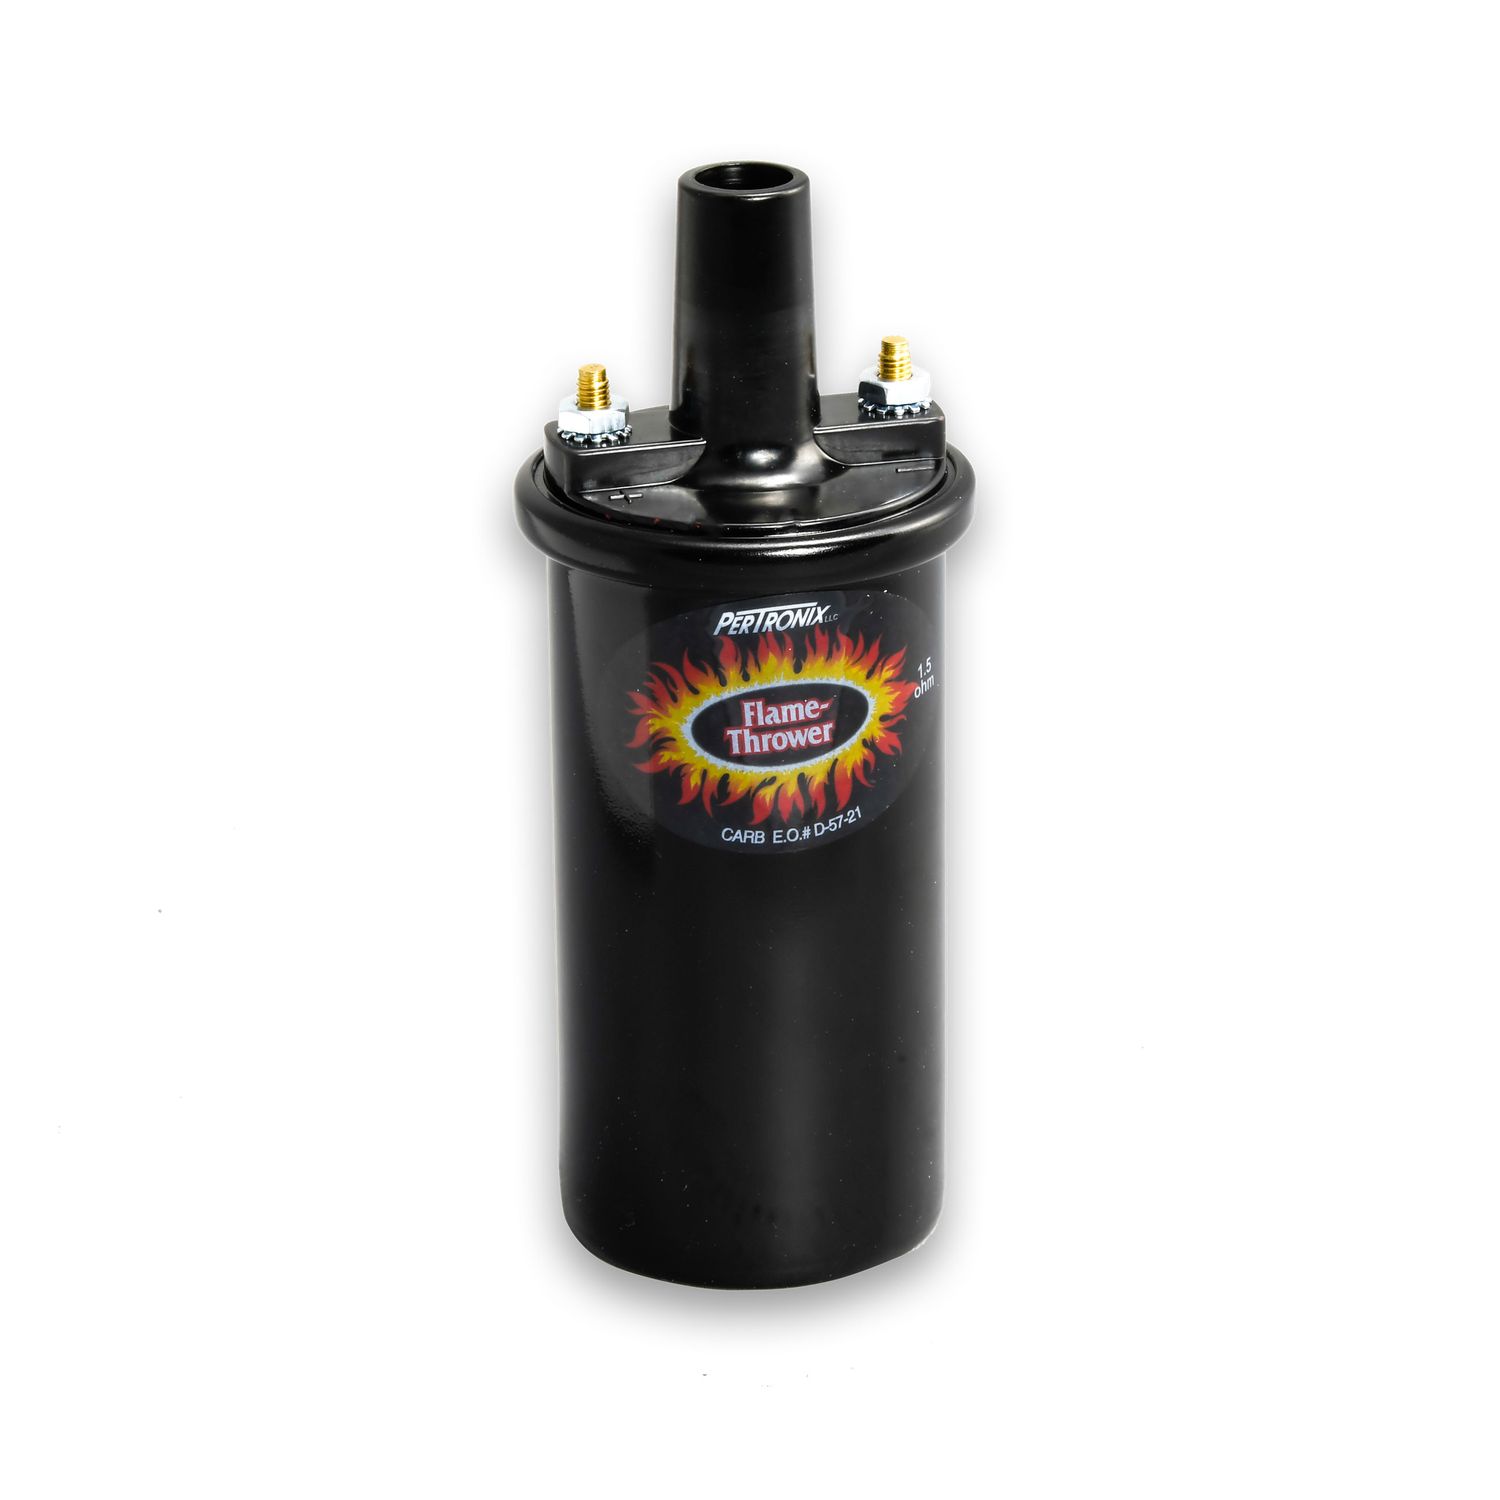 Pertronix 40011 Flame-Thrower Coil 40,000 Volt 1.5 ohm Black - image 1 of 4